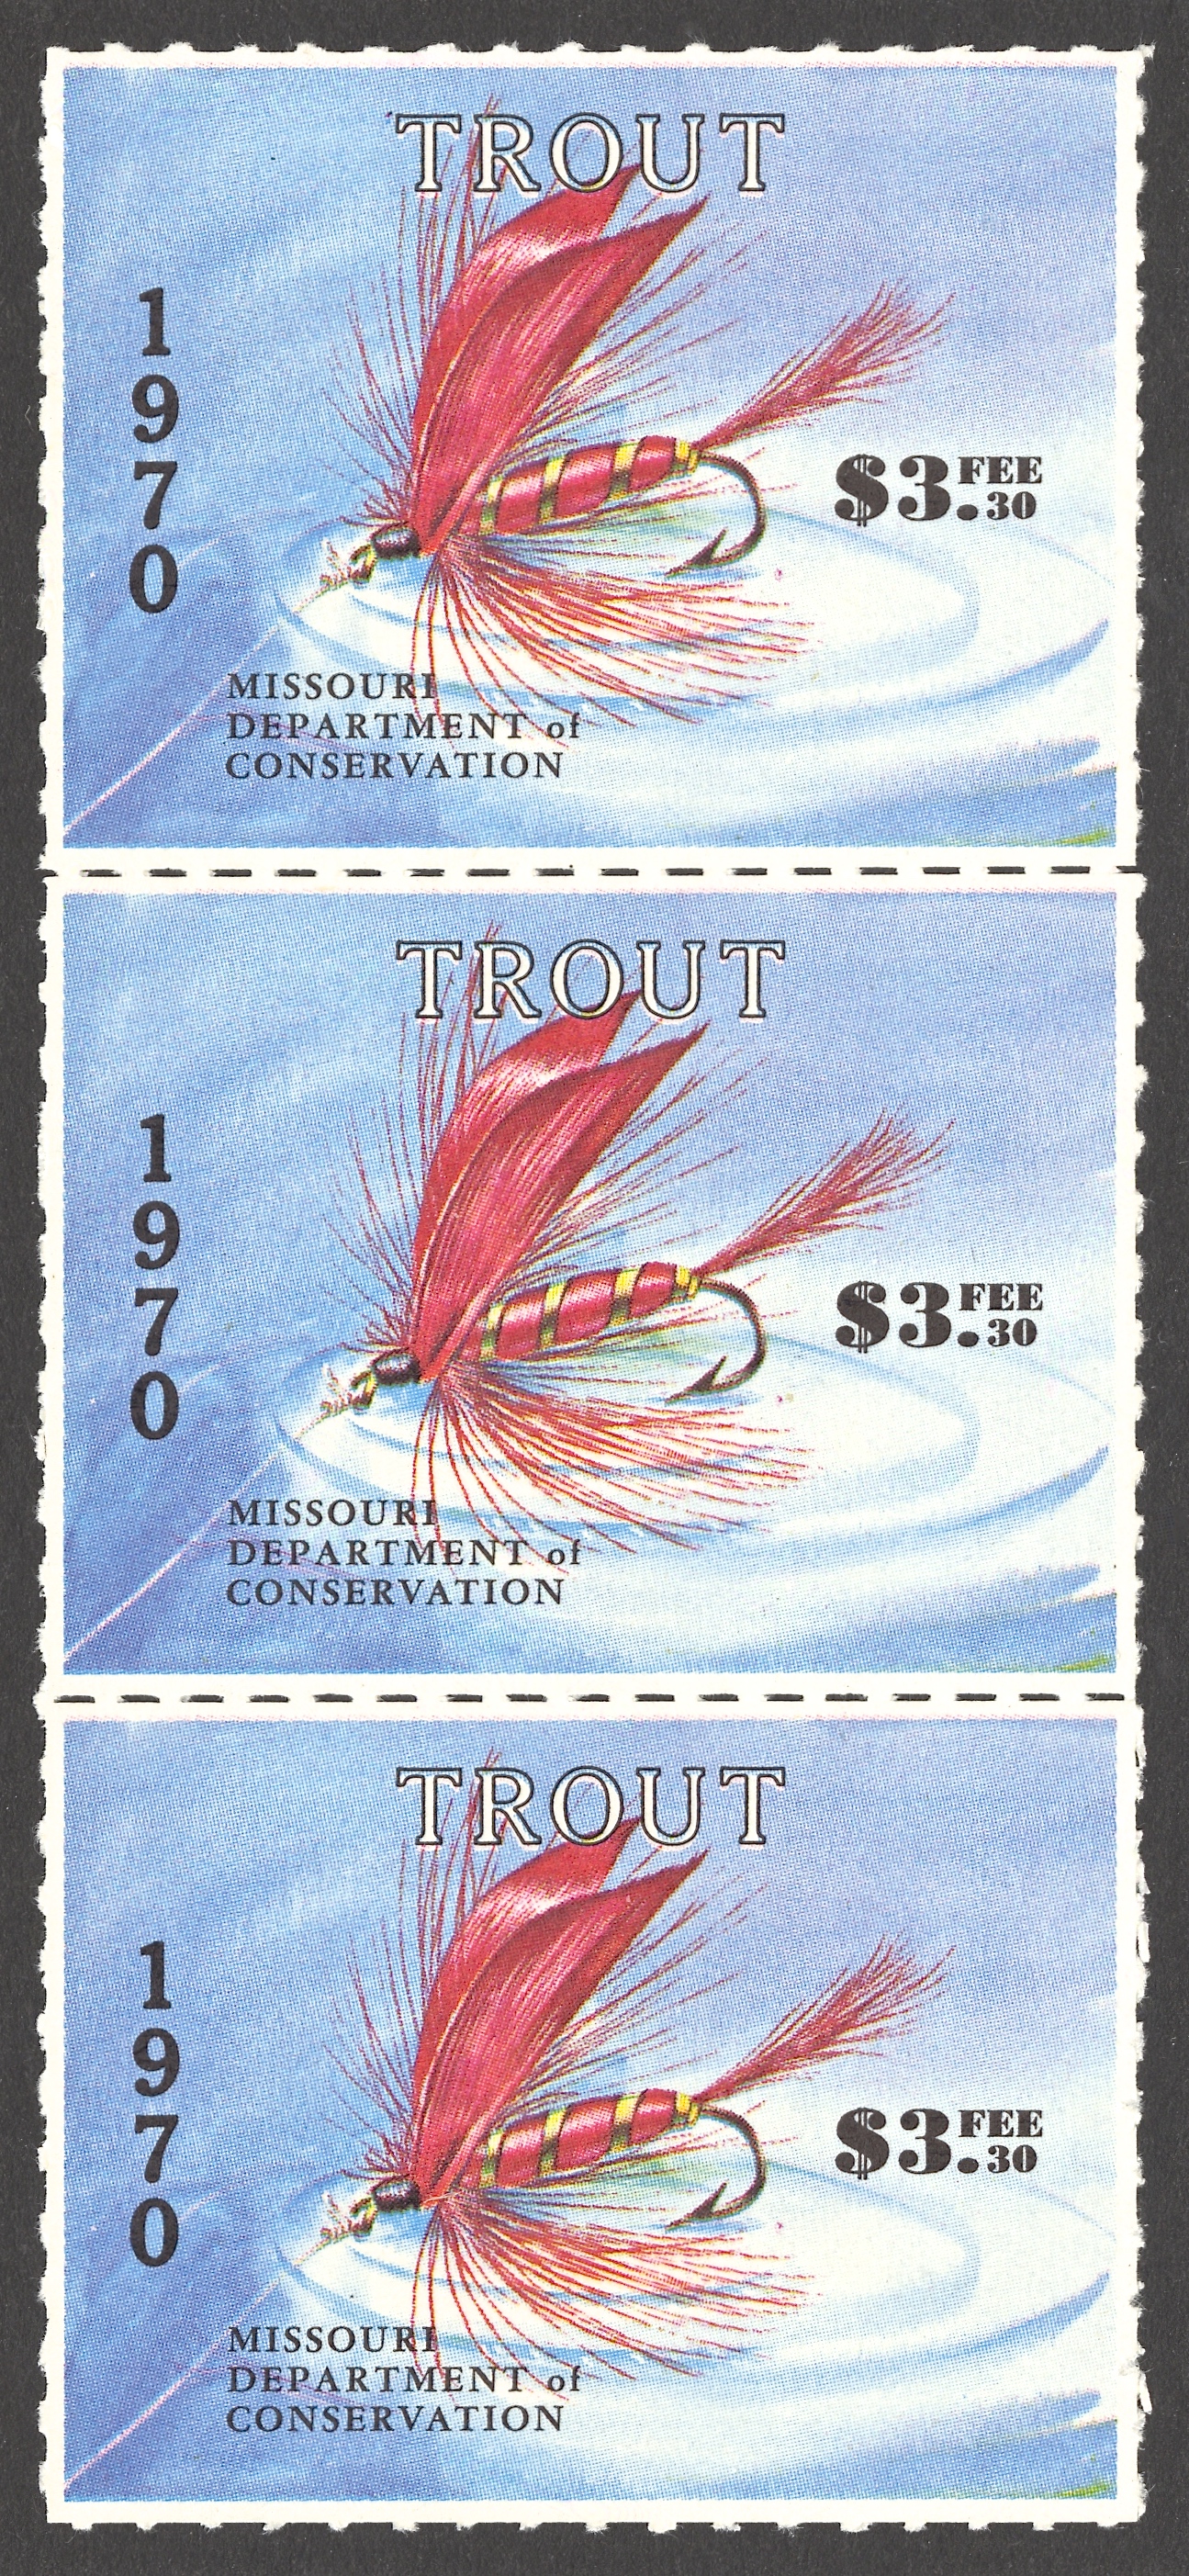 1970 Missouri Trout Error, Vertical Strip with Serial Numbers Missing